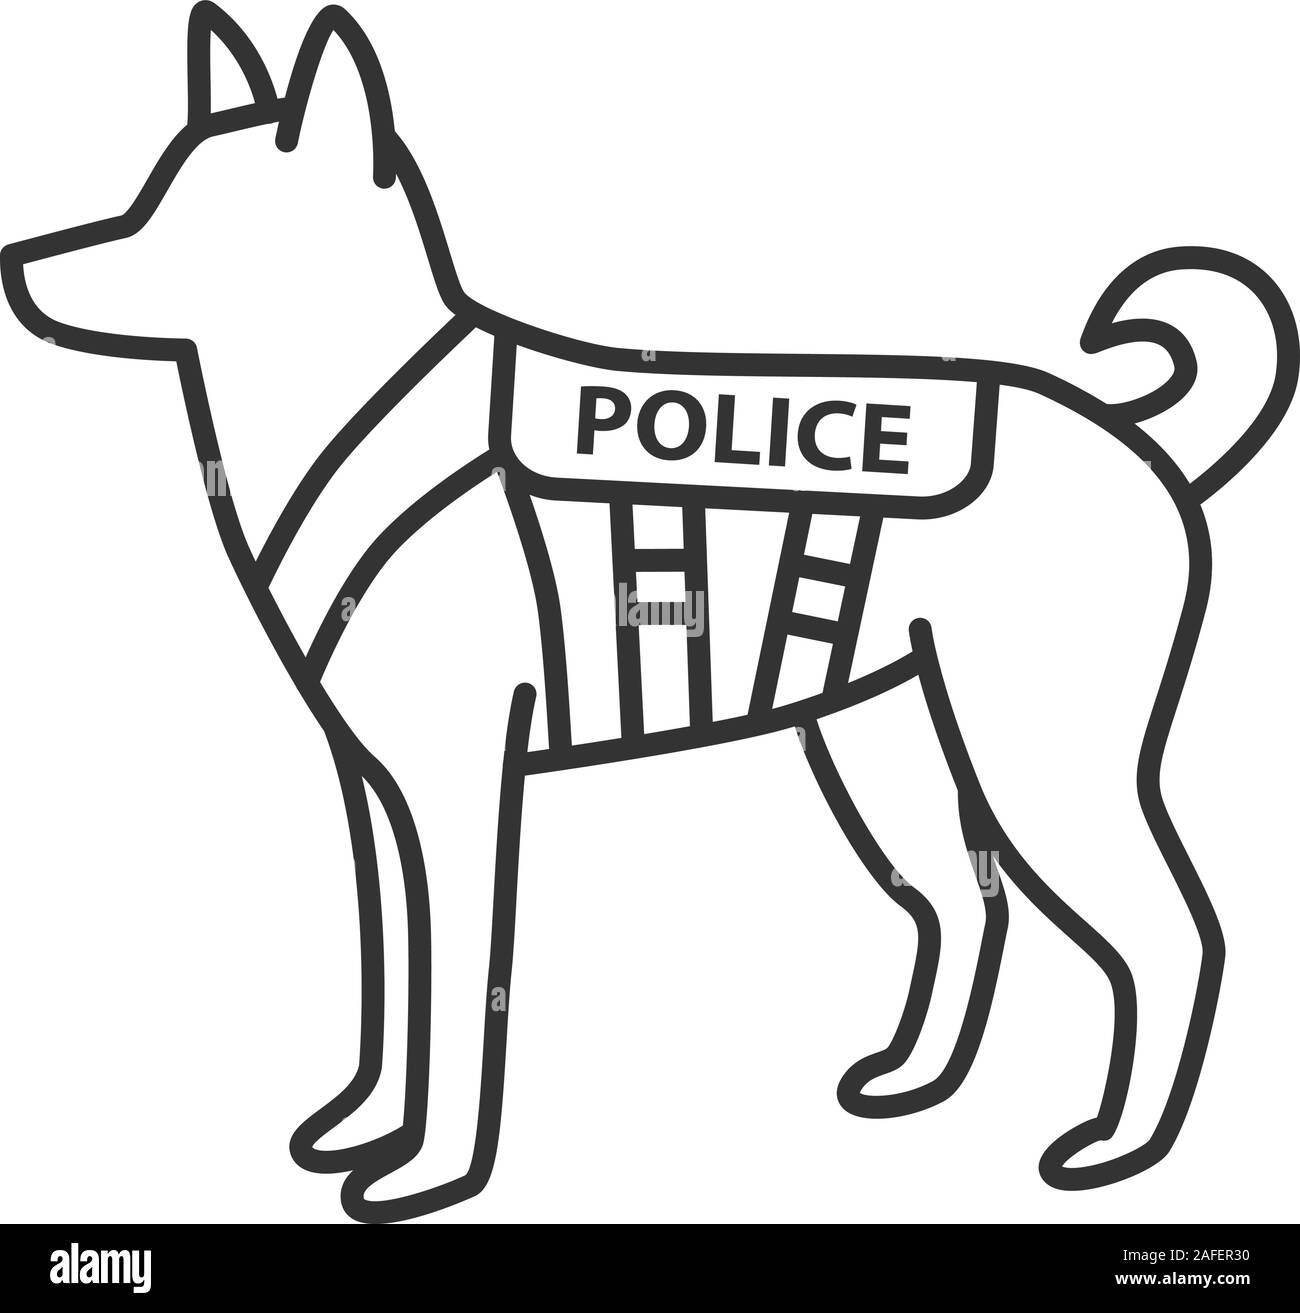 K9 police dog linear icon. German shepherd. Military dog breed. Thin line illustration. Contour symbol. Vector isolated outline drawing Stock Vector